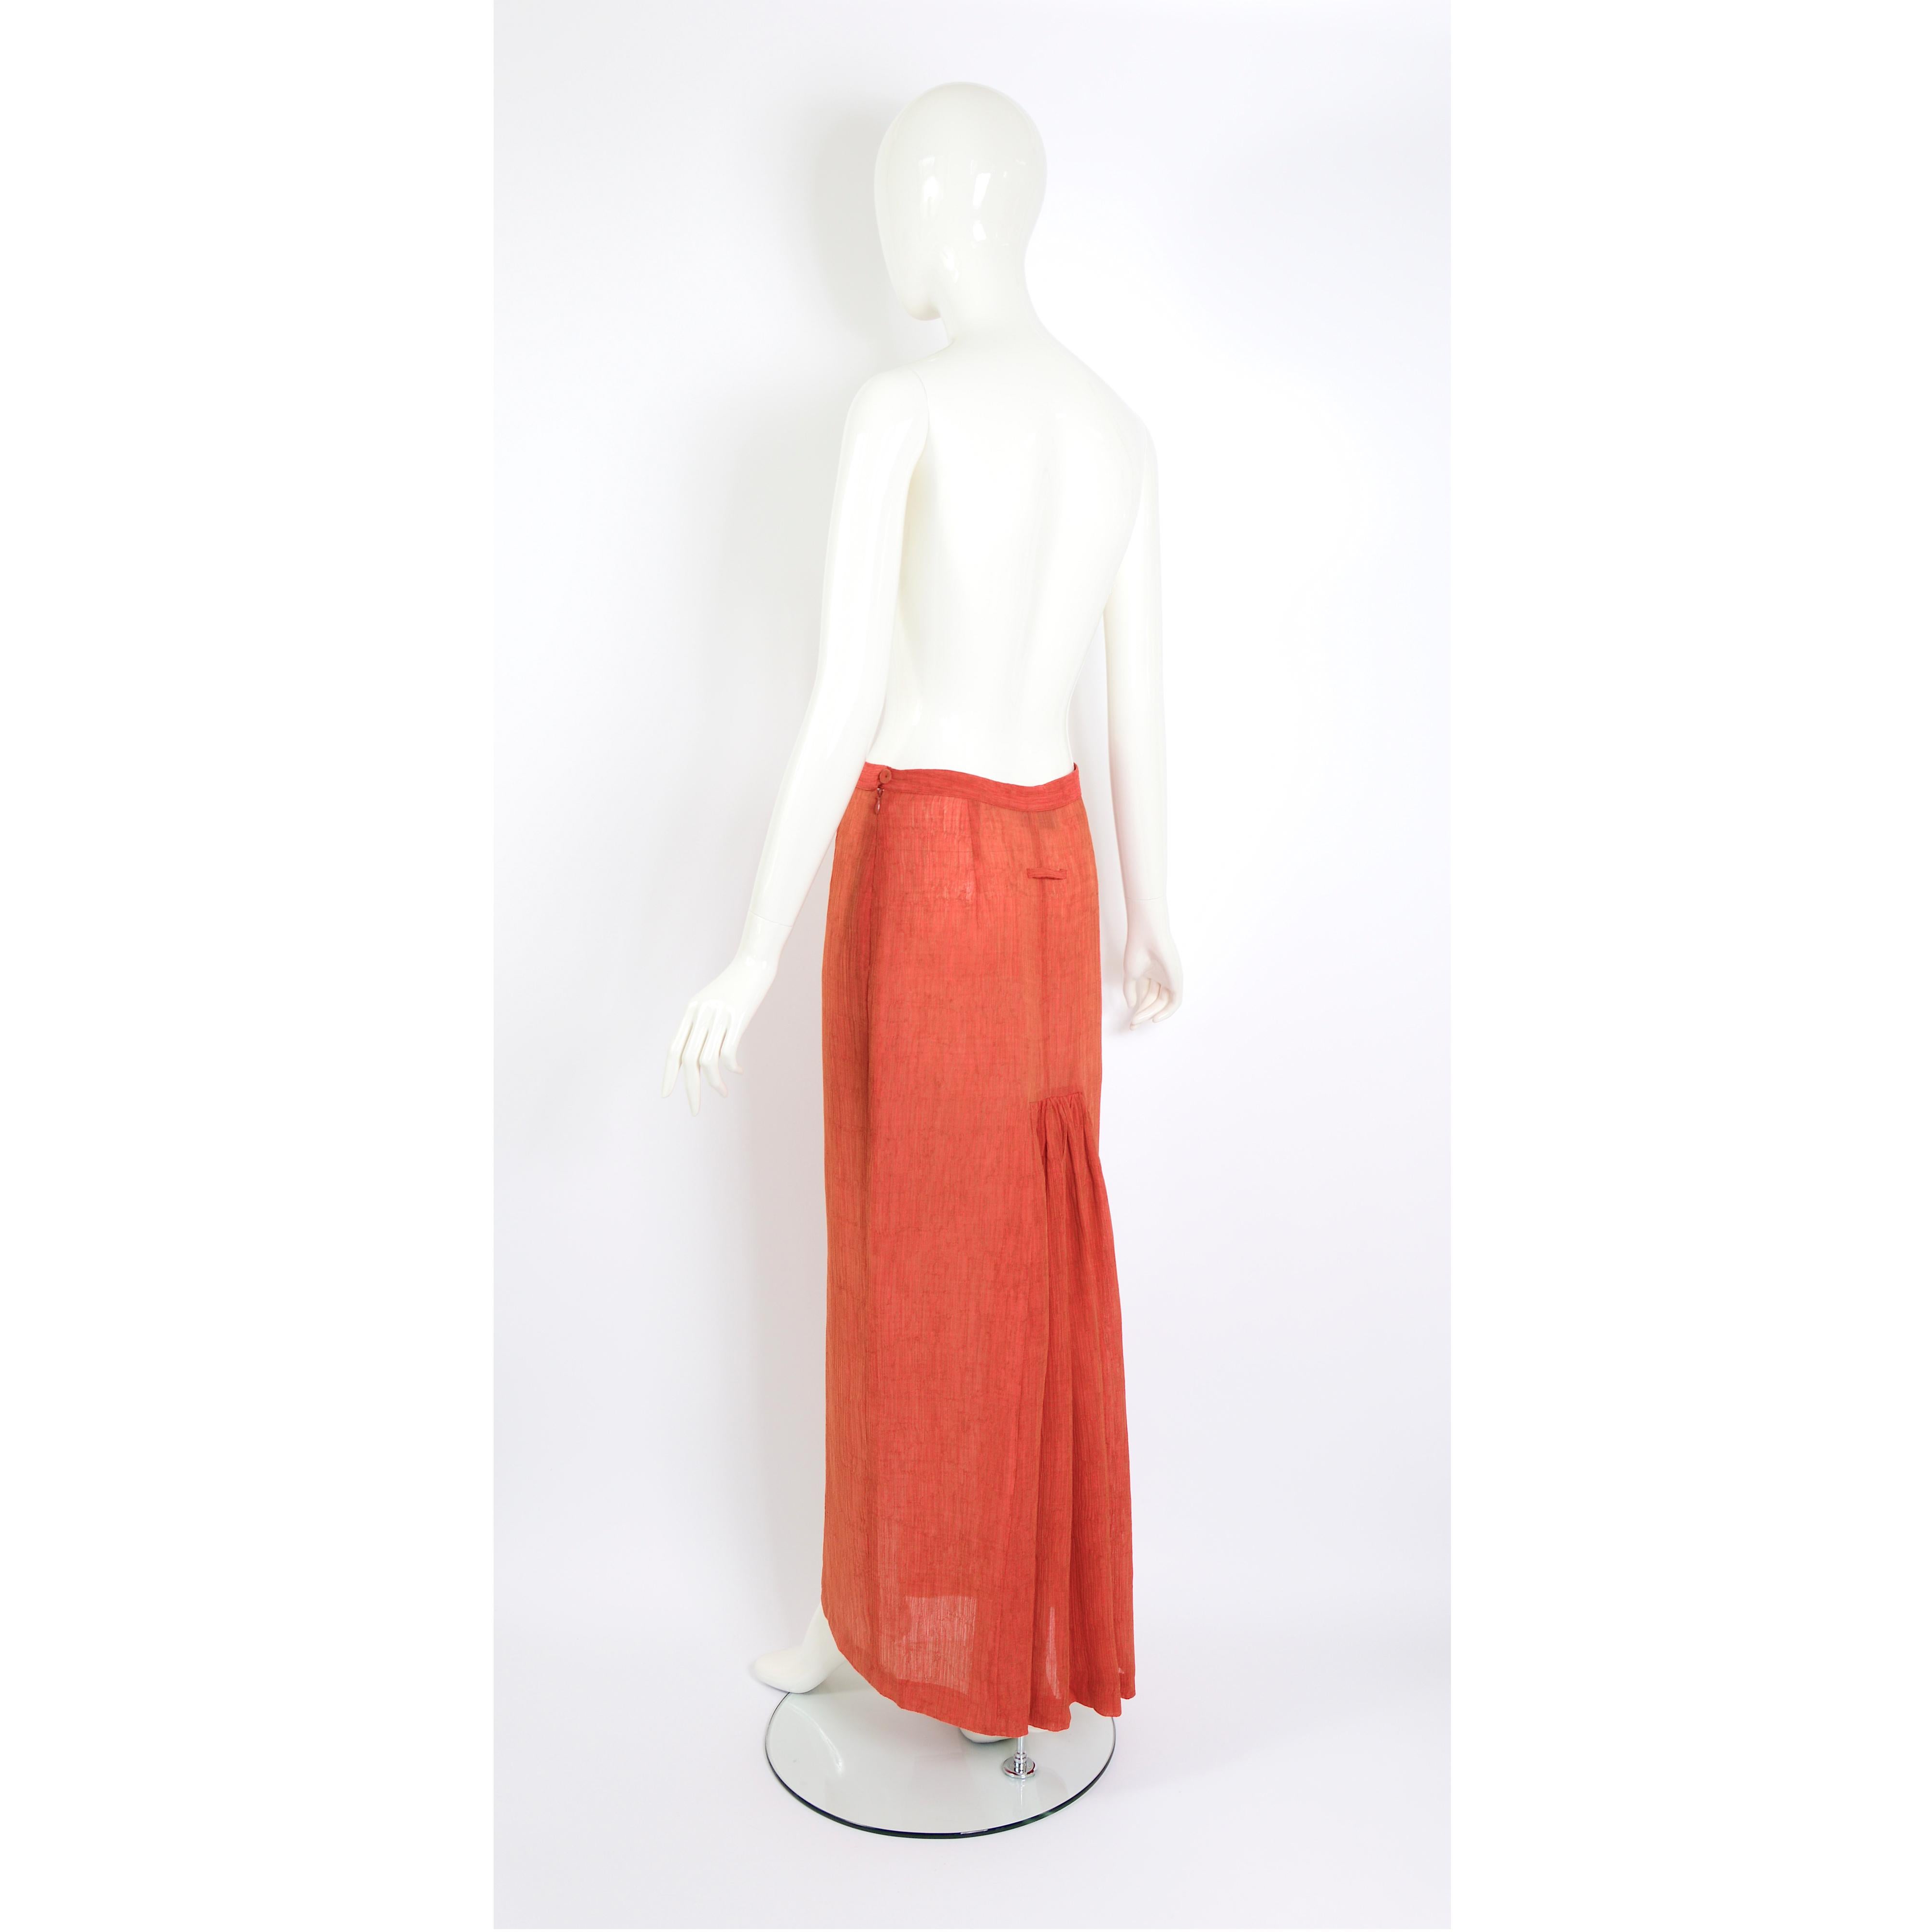 A beautiful Jean-Paul Gaultier vintage 1990s pleated back long terracotta orange color skirt. 
Size USA 10 - Italy 44 - Fr 40 - GB 12 
Measurements taken flat: Waist 14inch/36cm(x2) - Hip 19inch/48cm(x2) - Total Length 41inch/104cm
The skirt works